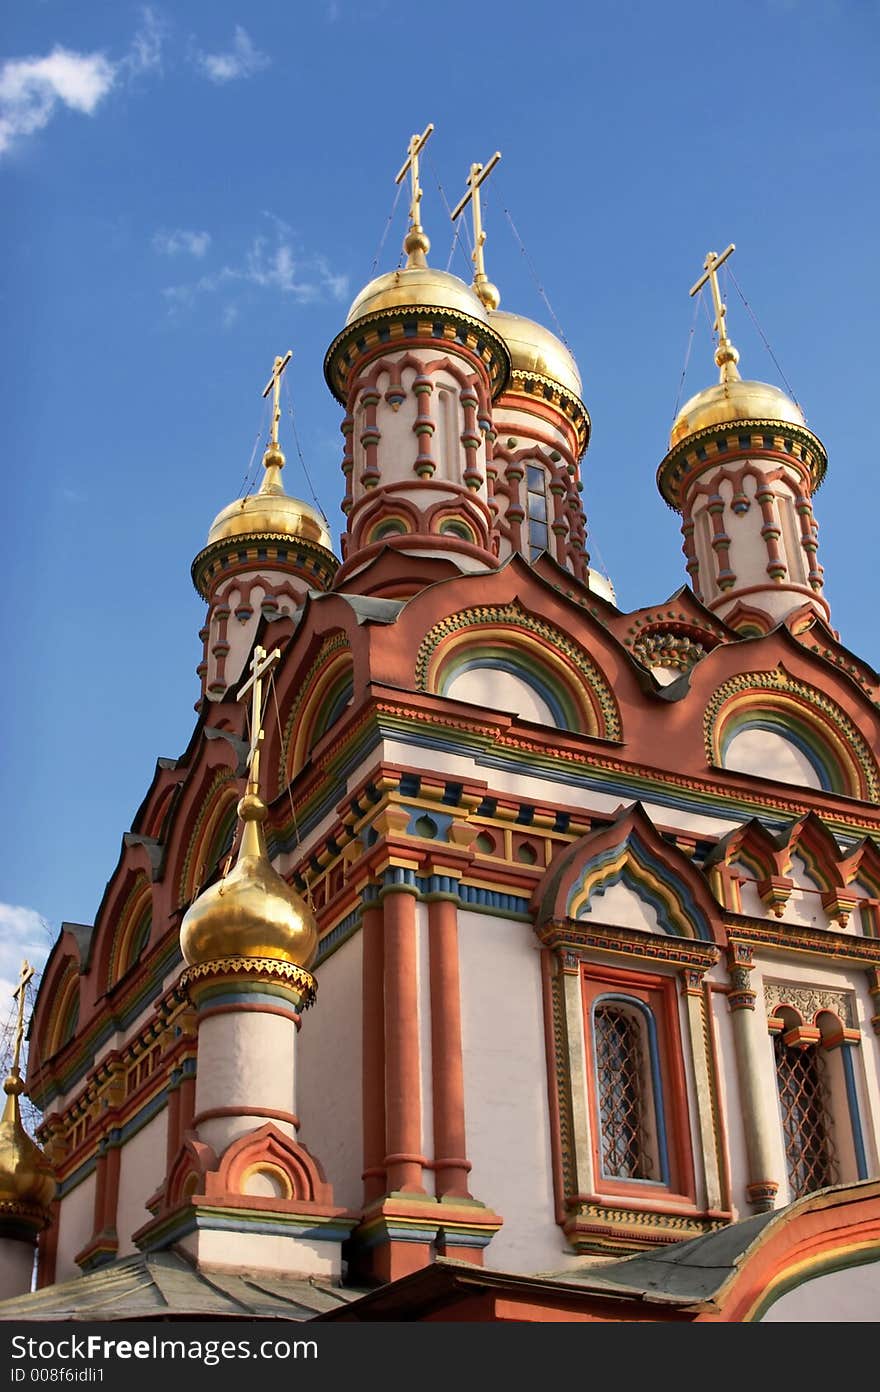 St Nikolay Cathedral in Bersenevo, Moscow.